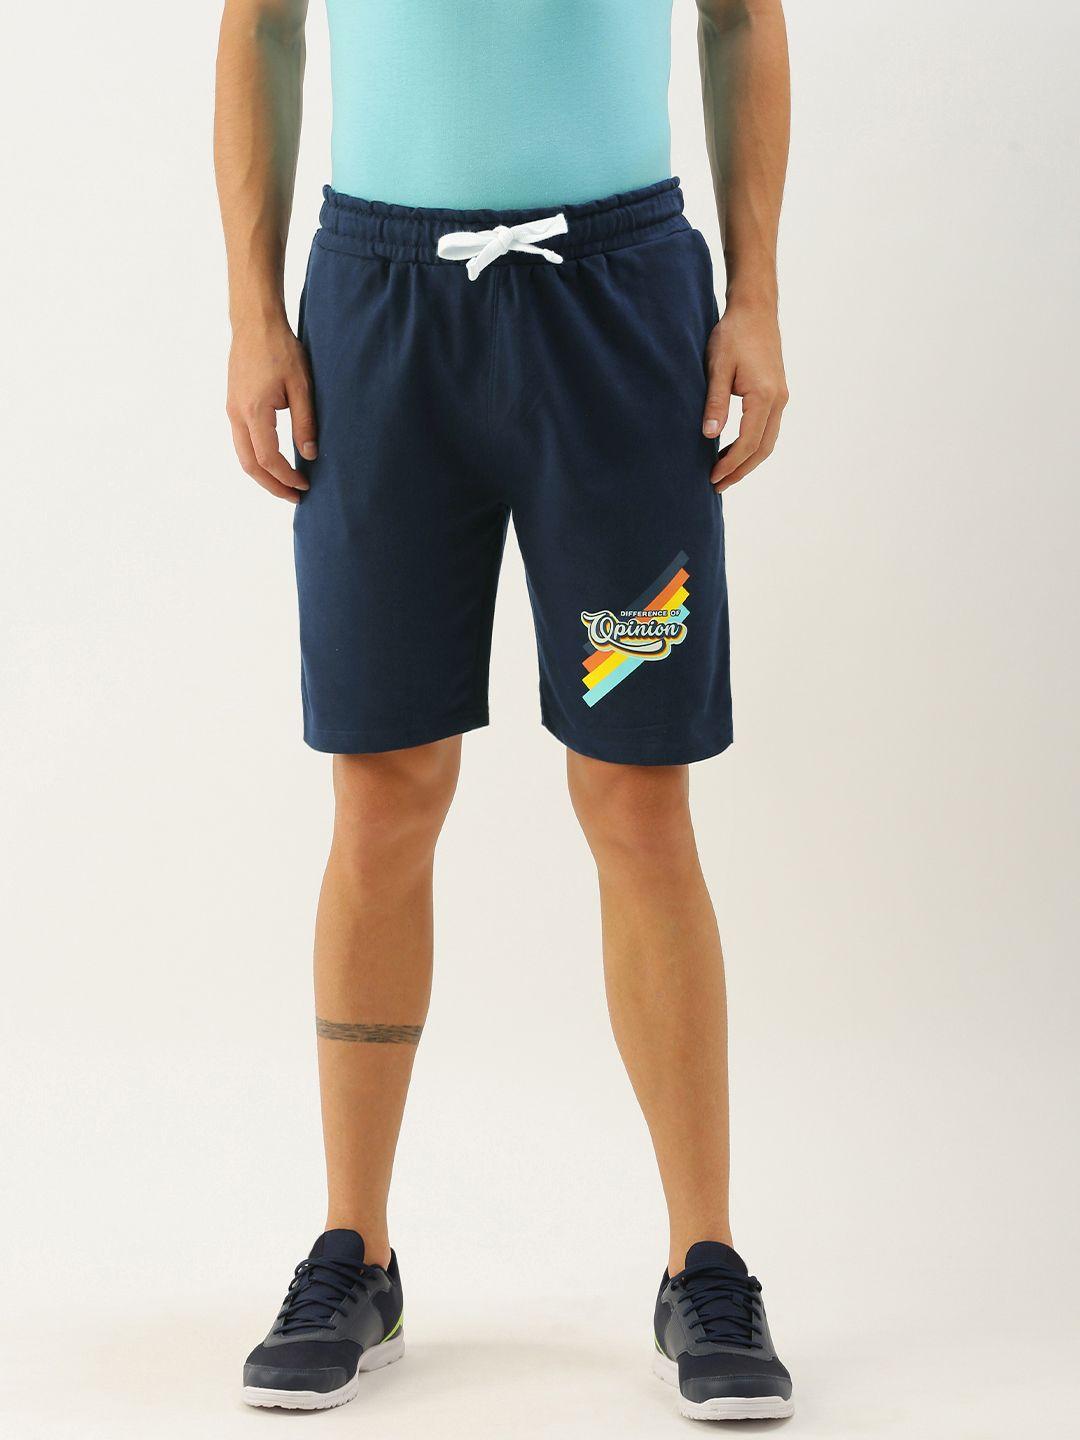 difference-of-opinion-men-navy-blue-typography-printed-mid-rise-regular-shorts